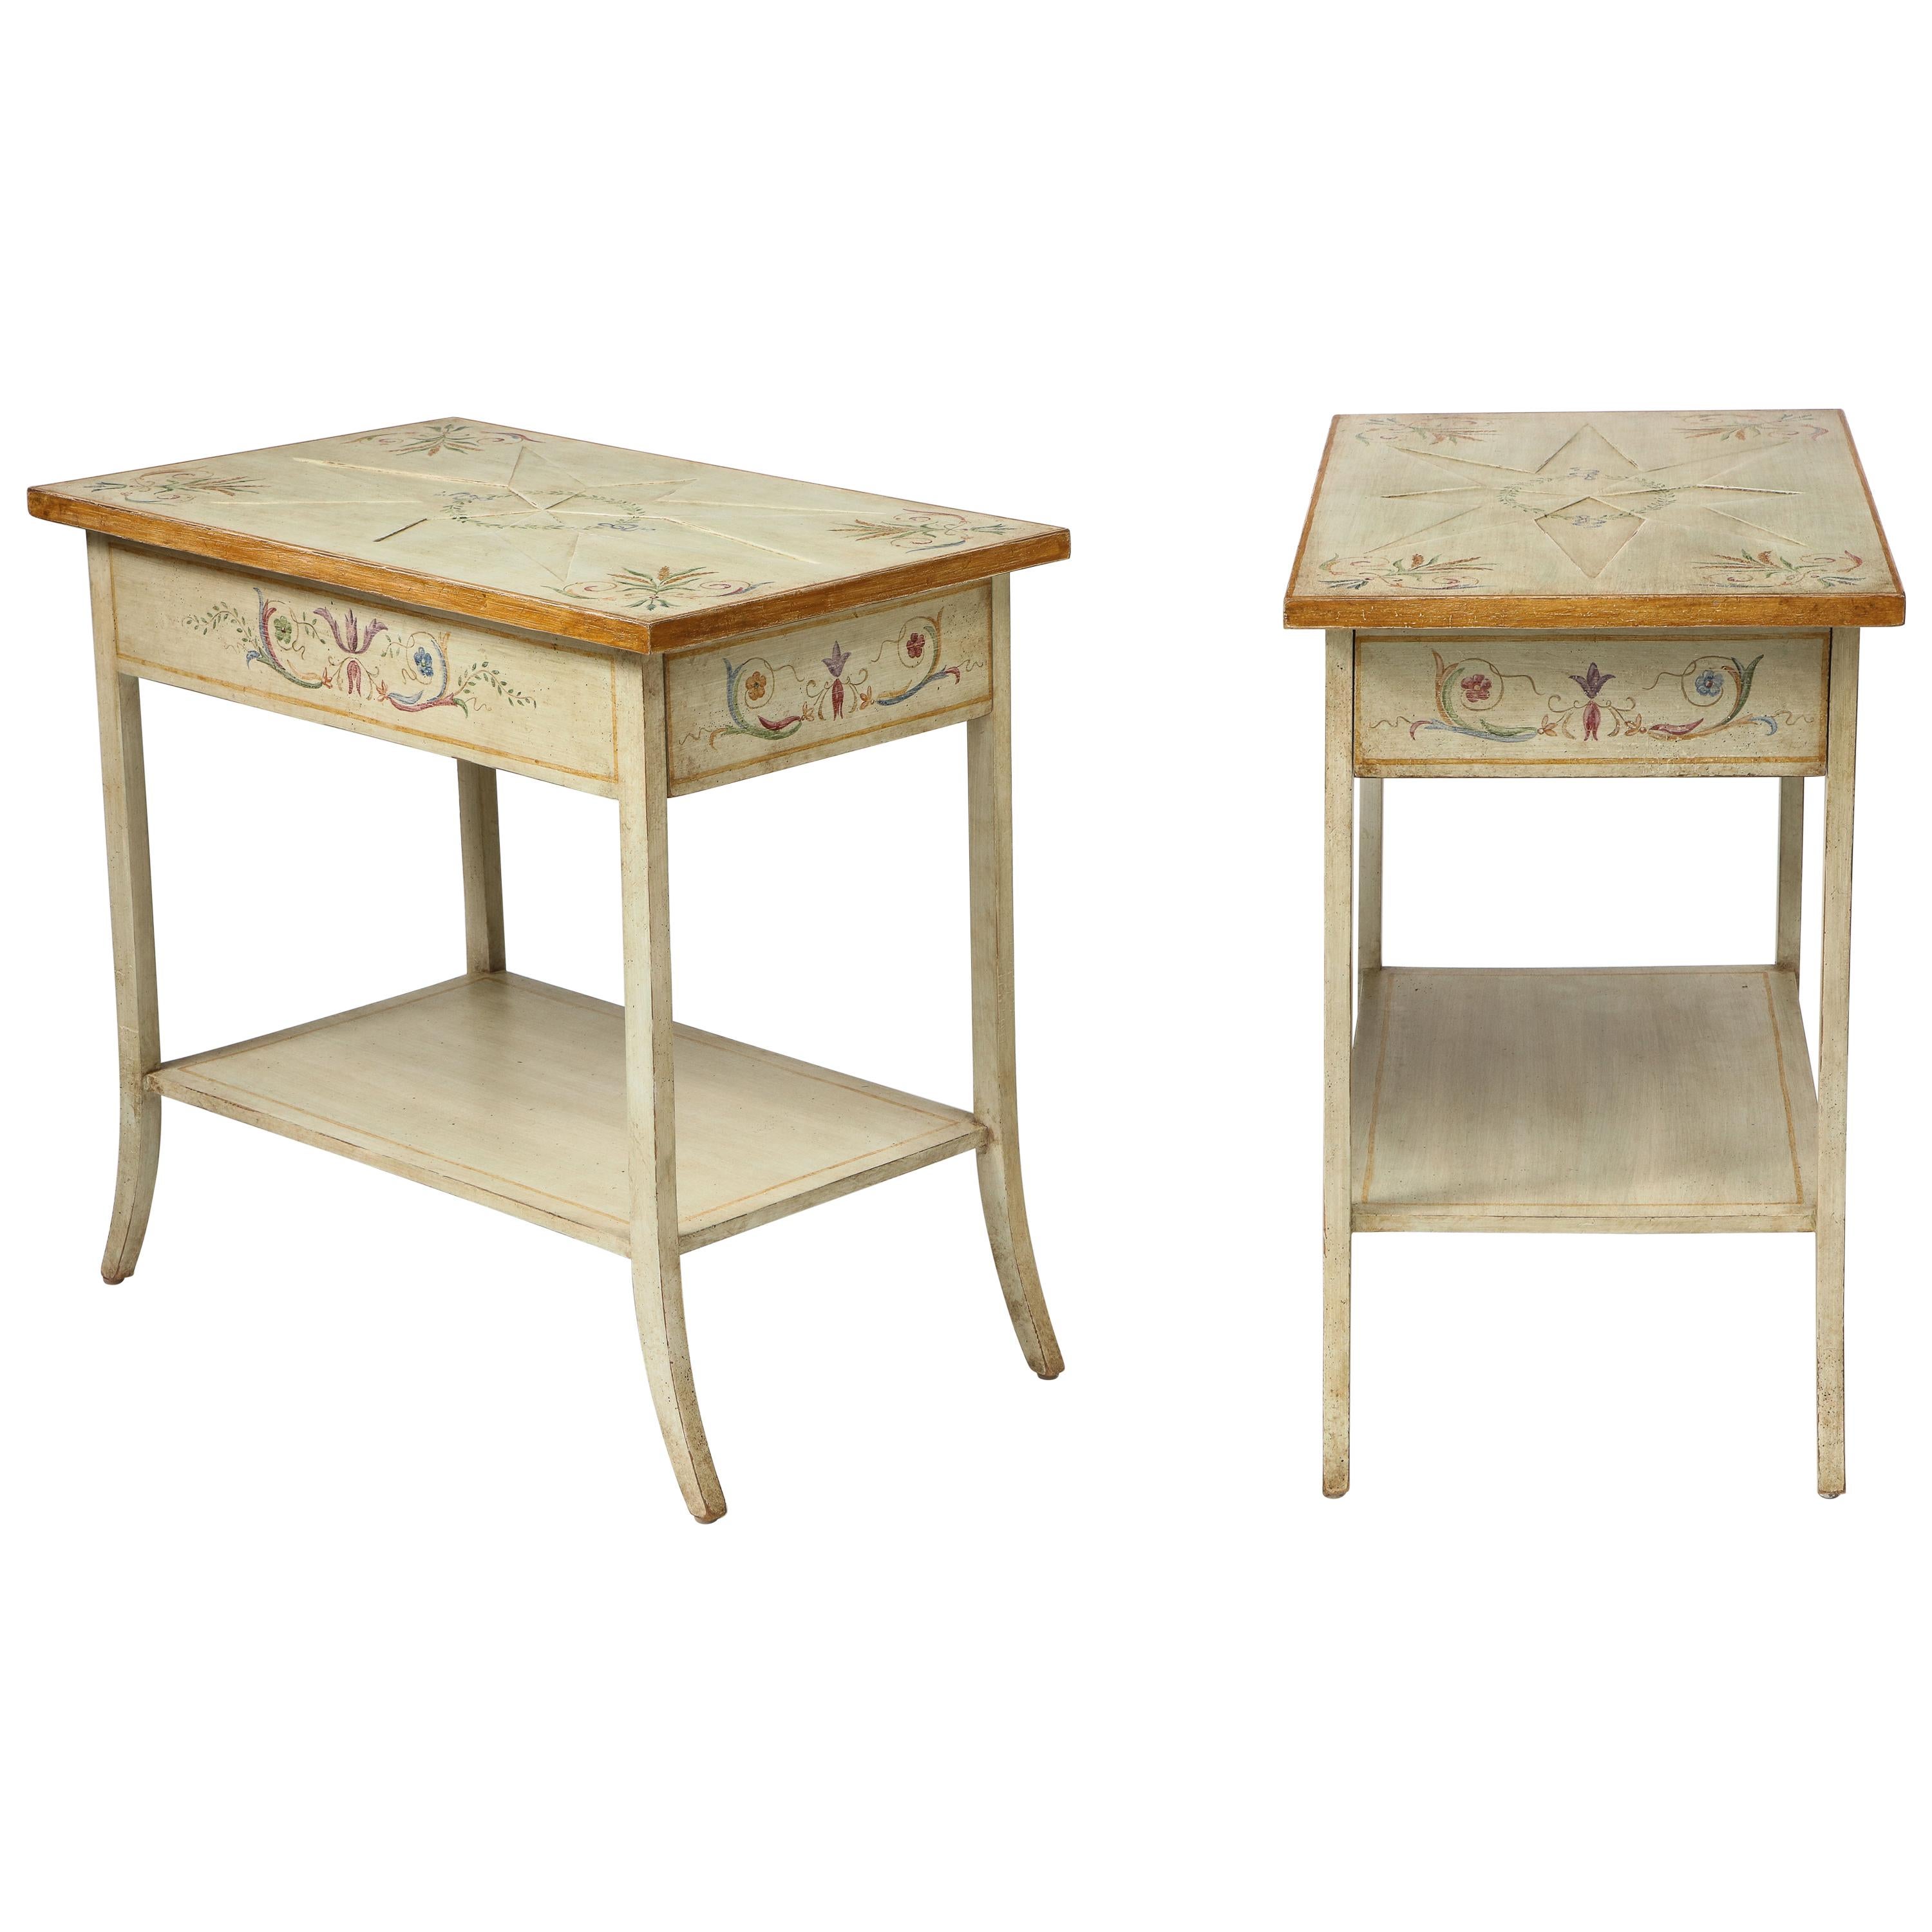 Pair of Polychrome Painted Bedside Tables